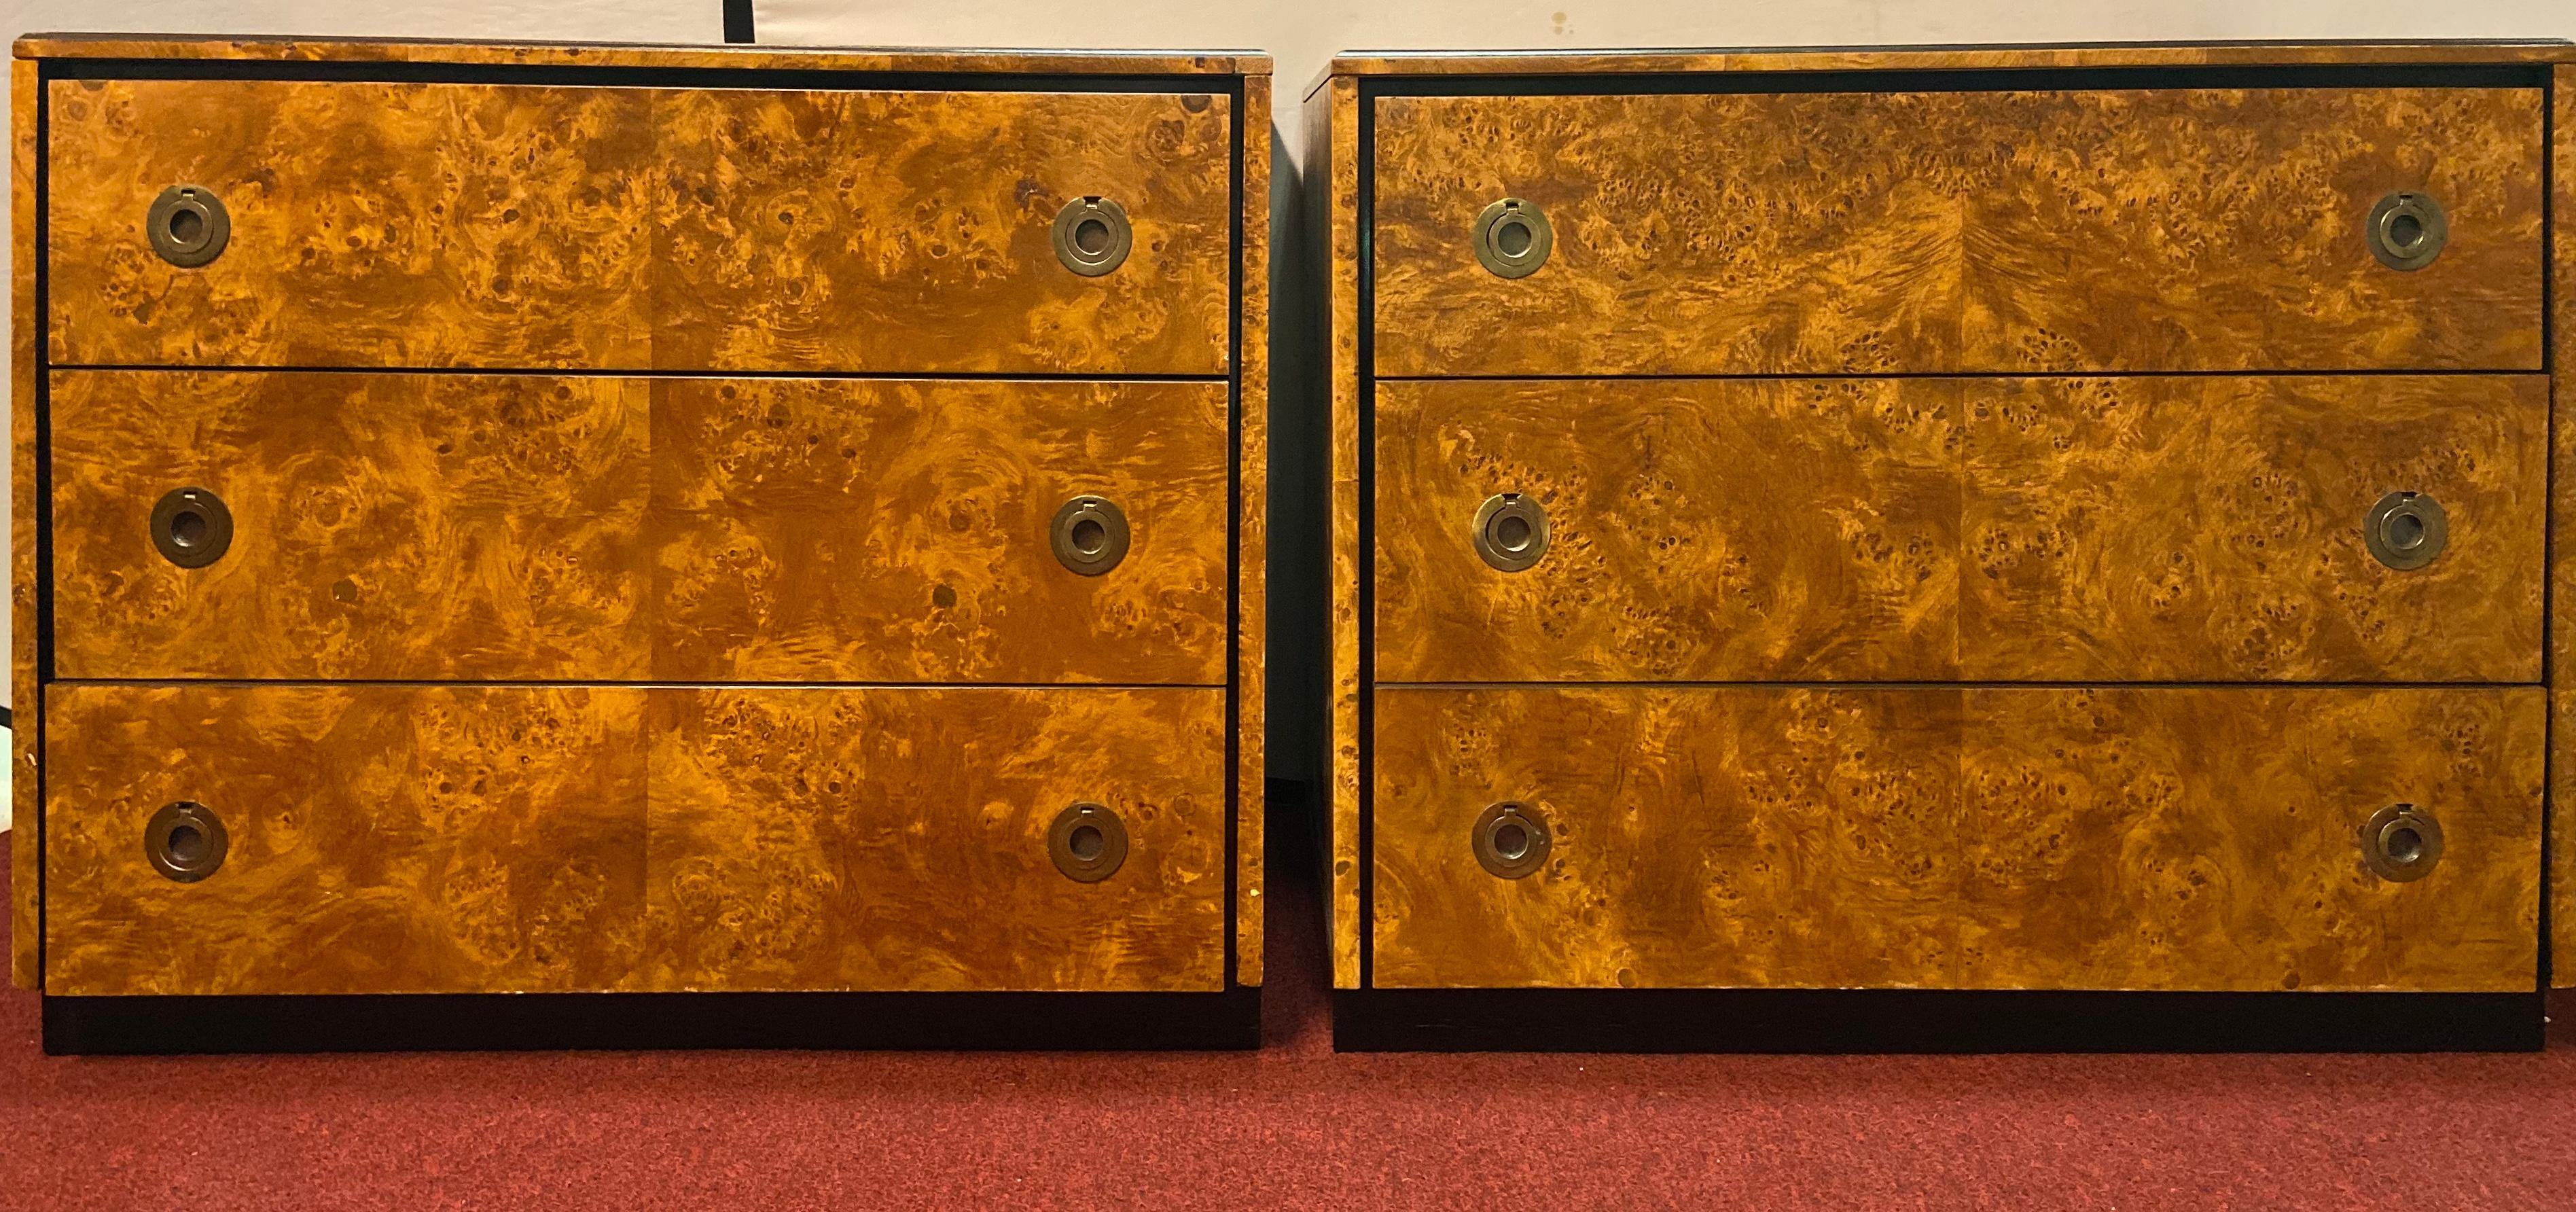 A timeless pair of Mid-Century Modern tortoise burl and ebony wood chests, commodes, or nightstands. Each commode features three drawers and gilt pulls. Each piece is labeled in the back. The pair is in great condition.